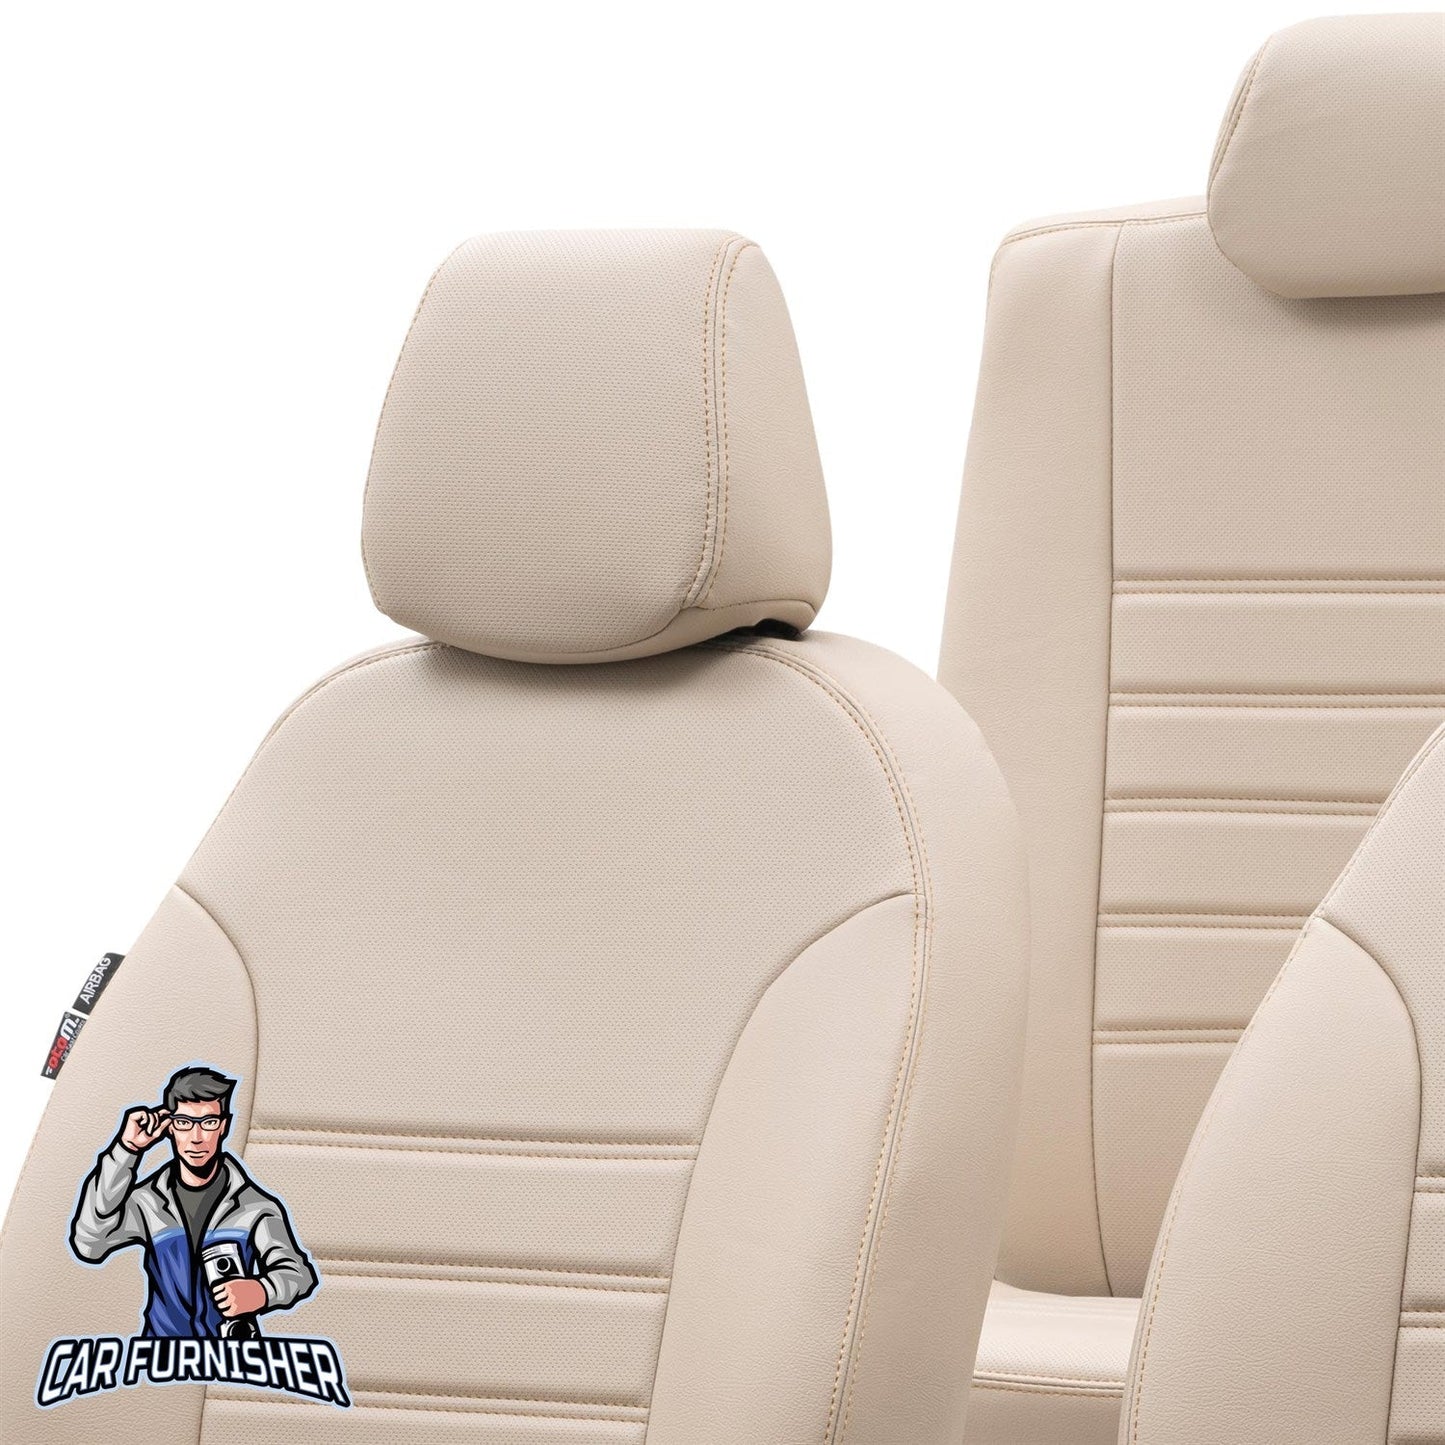 Fiat Marea Seat Covers Istanbul Leather Design Beige Leather